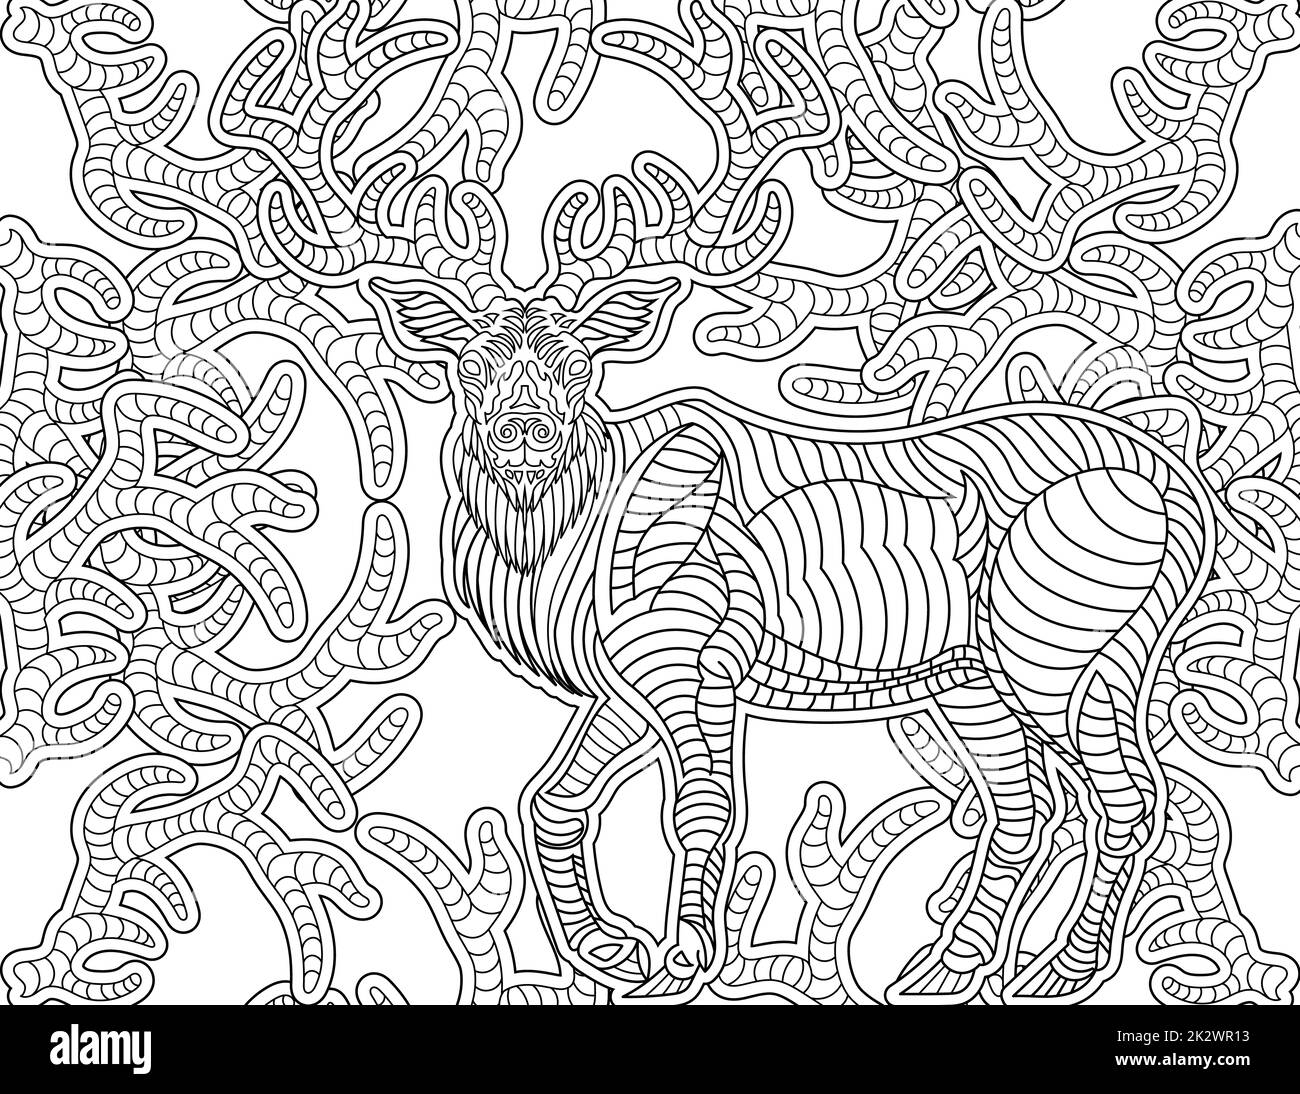 Deer Line Drawing With Long Horns Growing Around It Coloring Book idea Stock Photo